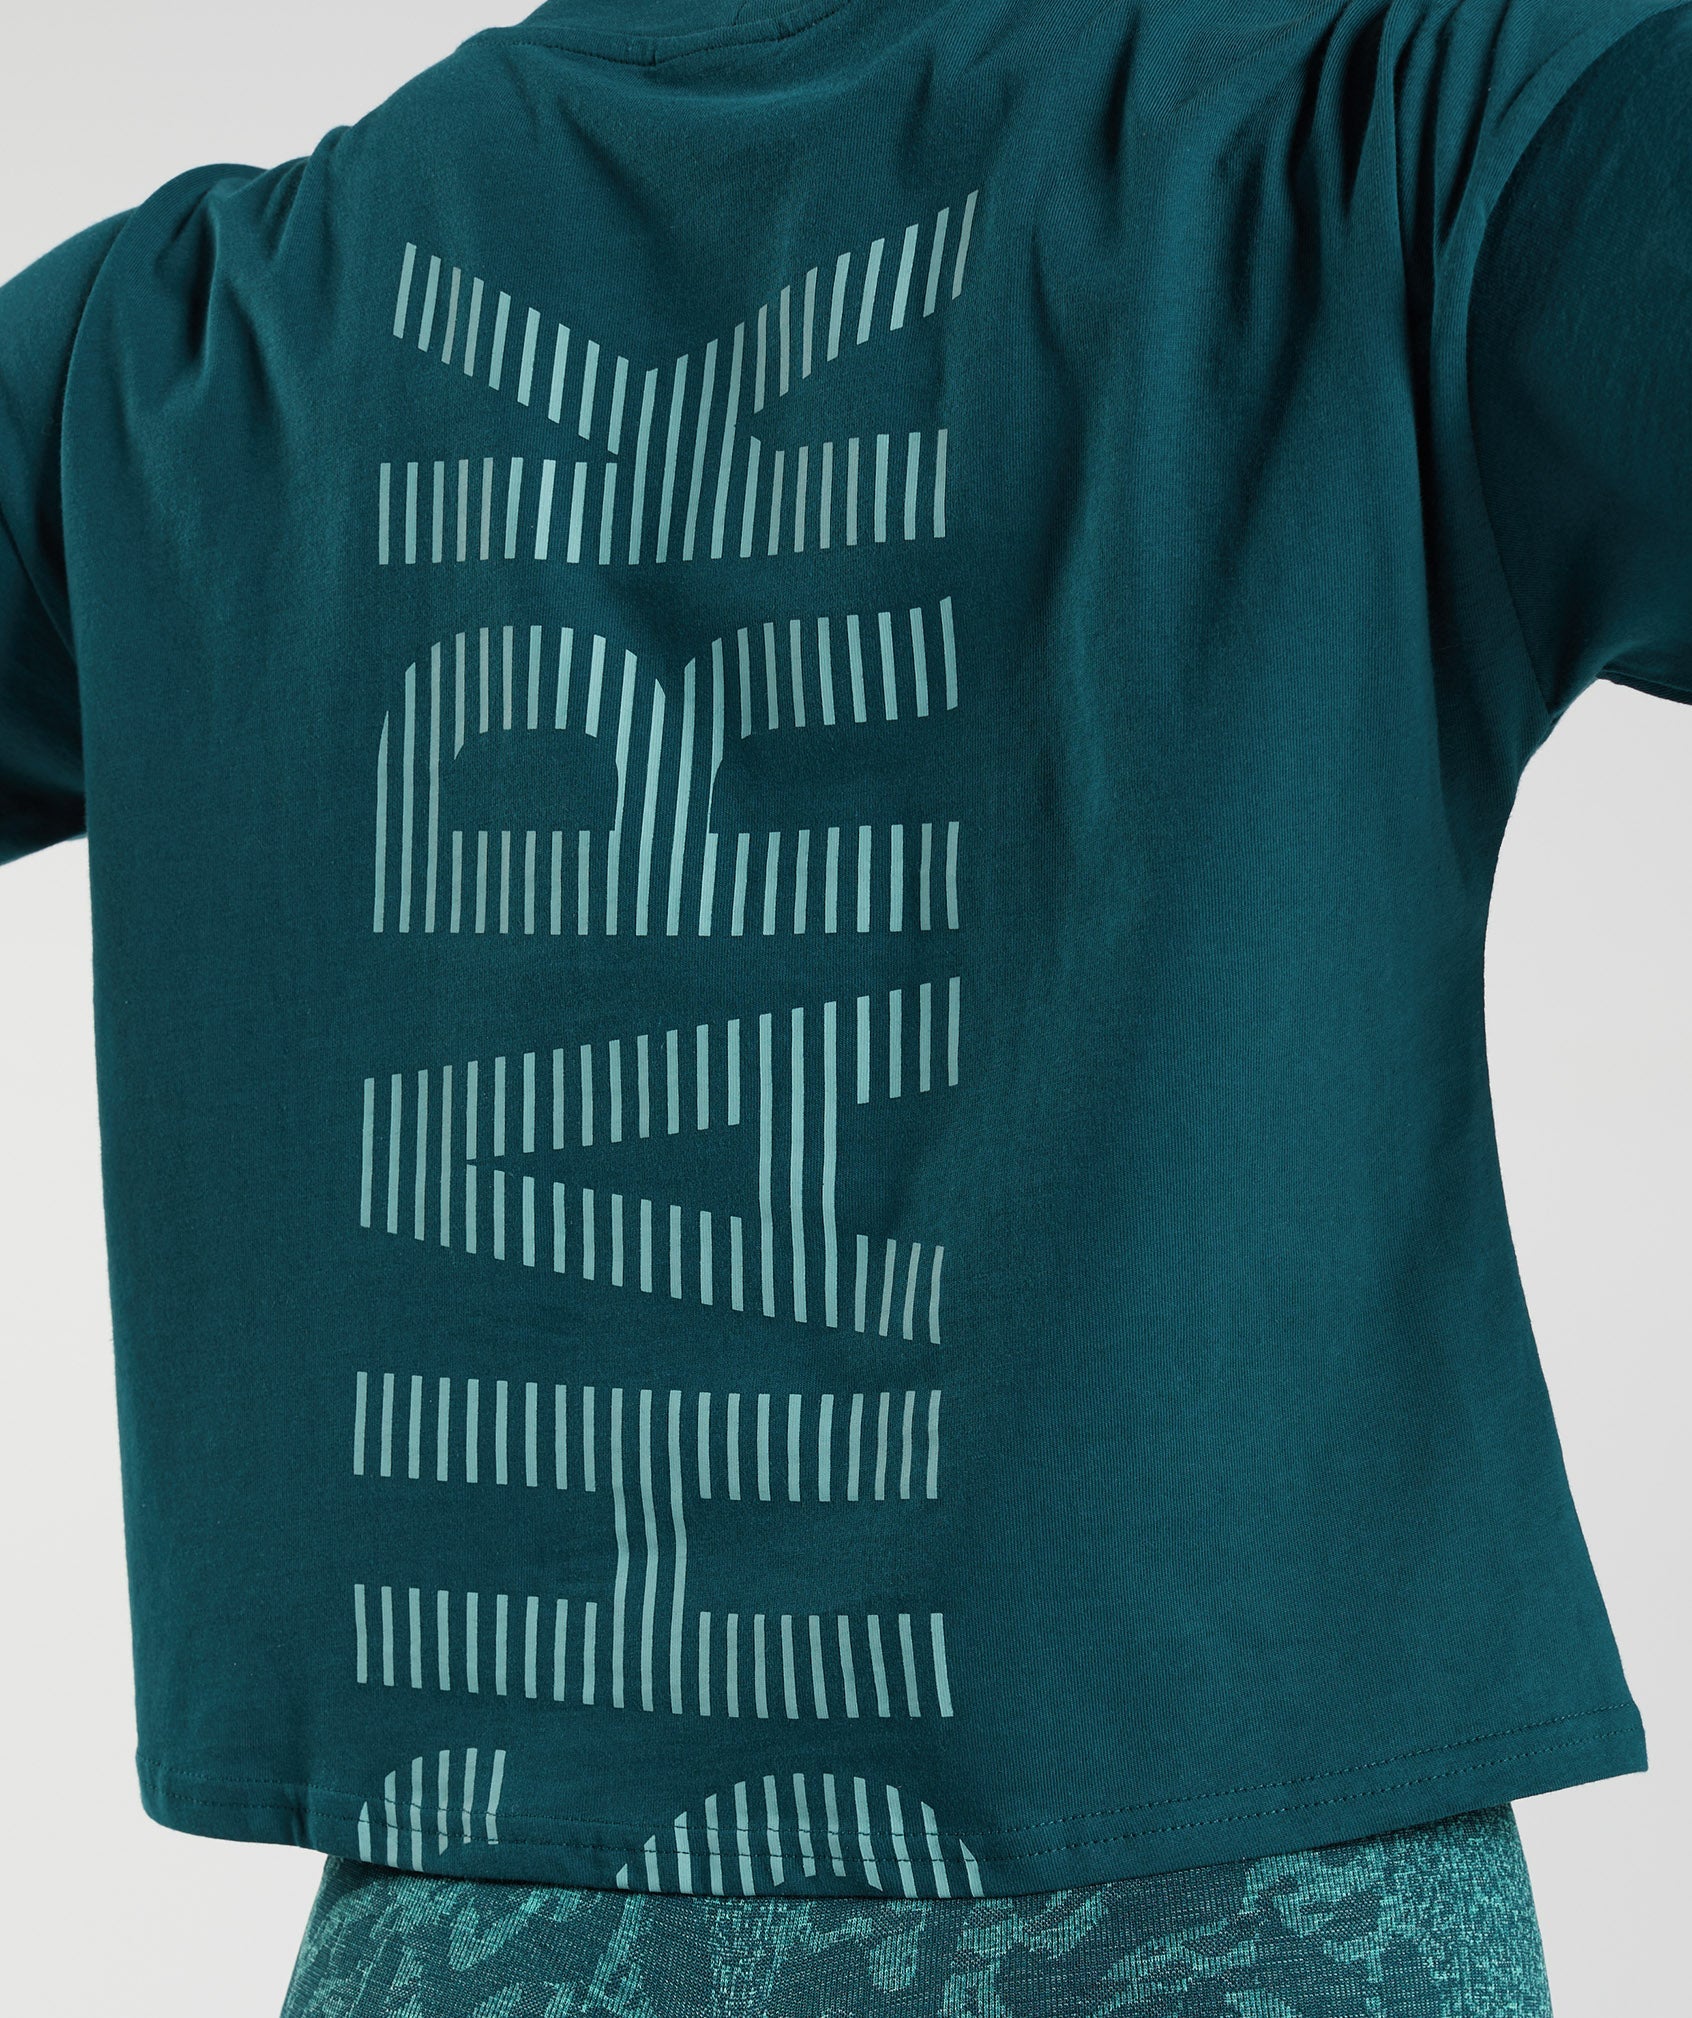 315 Midi T-Shirt in Winter Teal/Pearl Blue - view 5